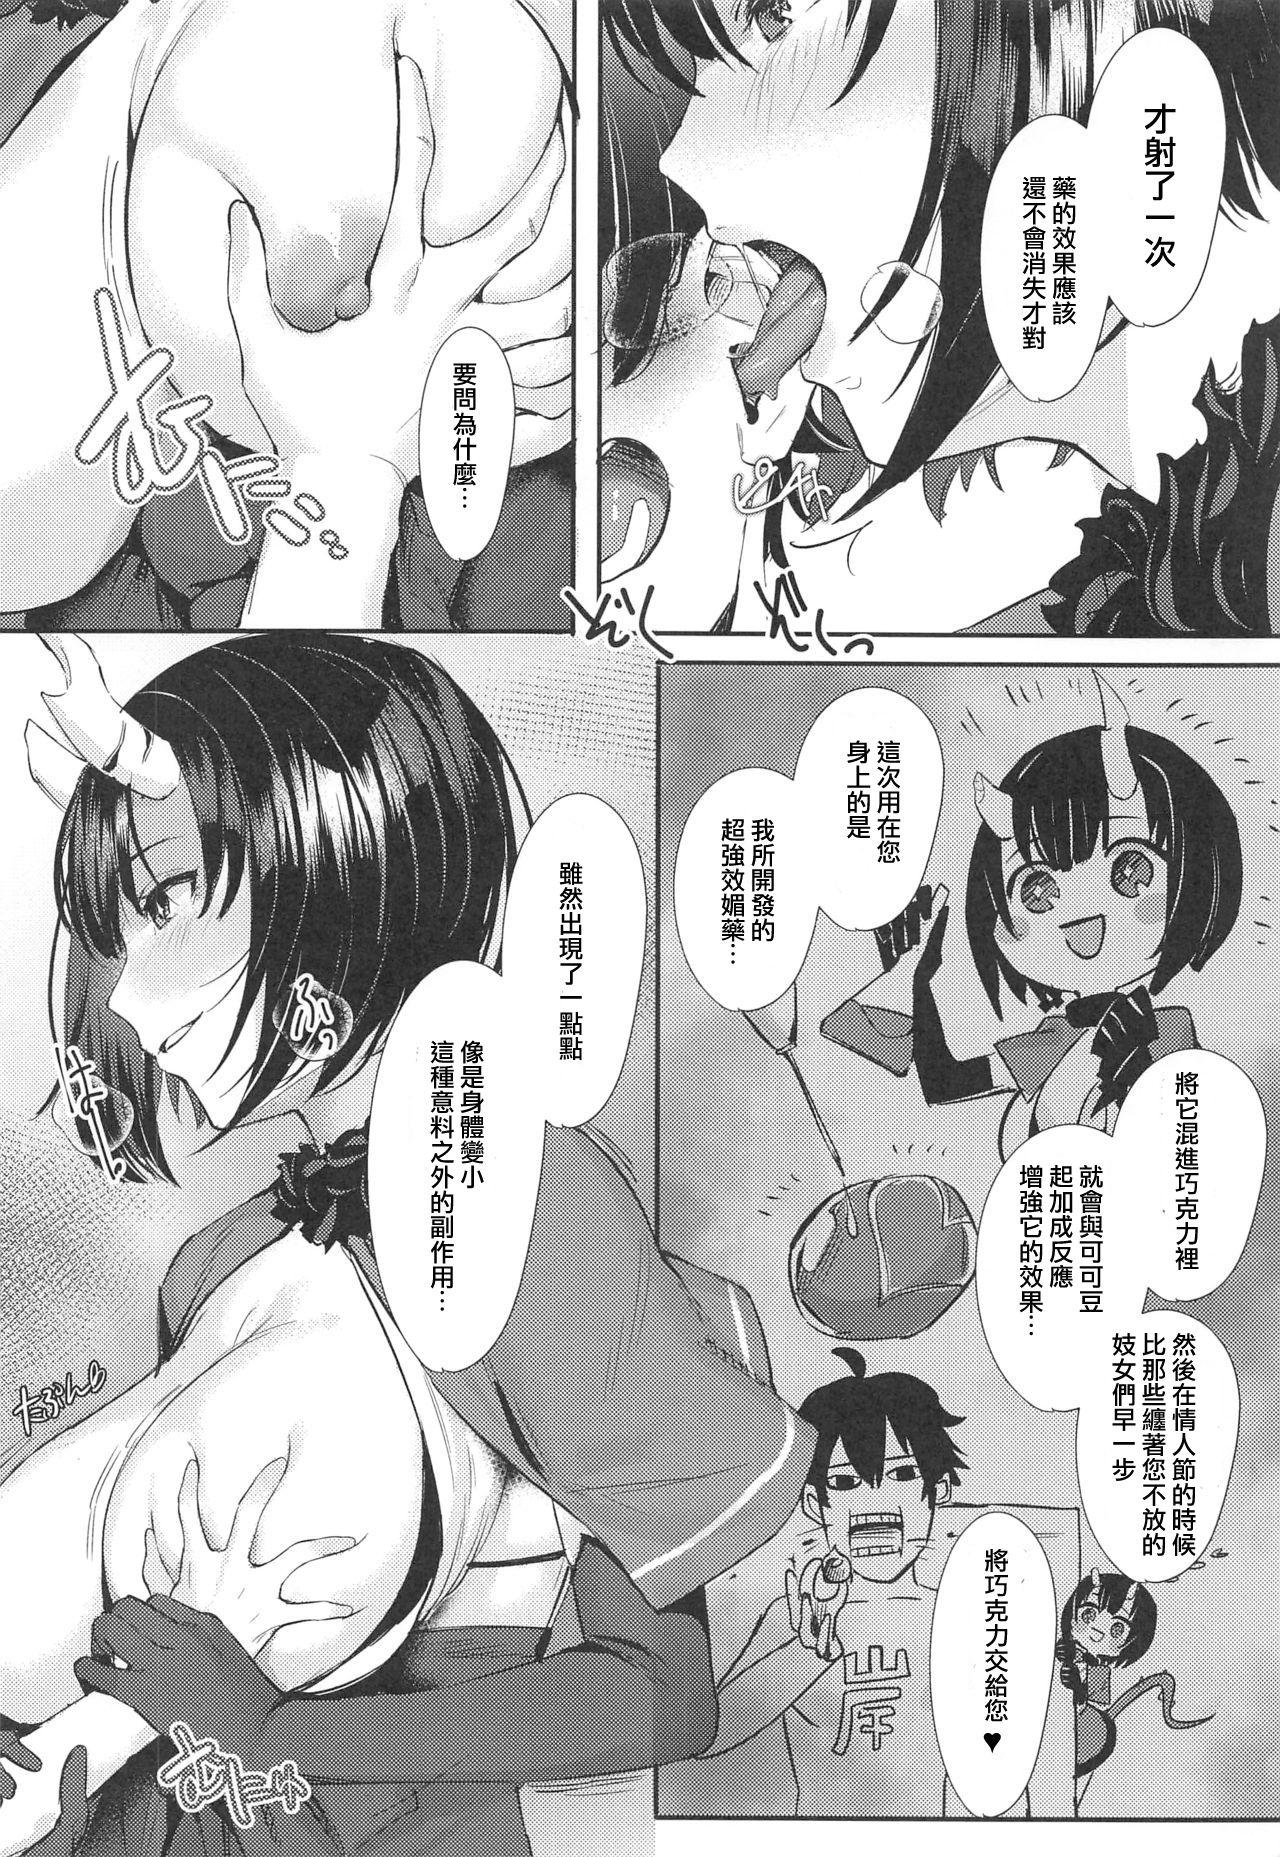 Innocent Onee-chan Connect - Princess connect Exgf - Page 6